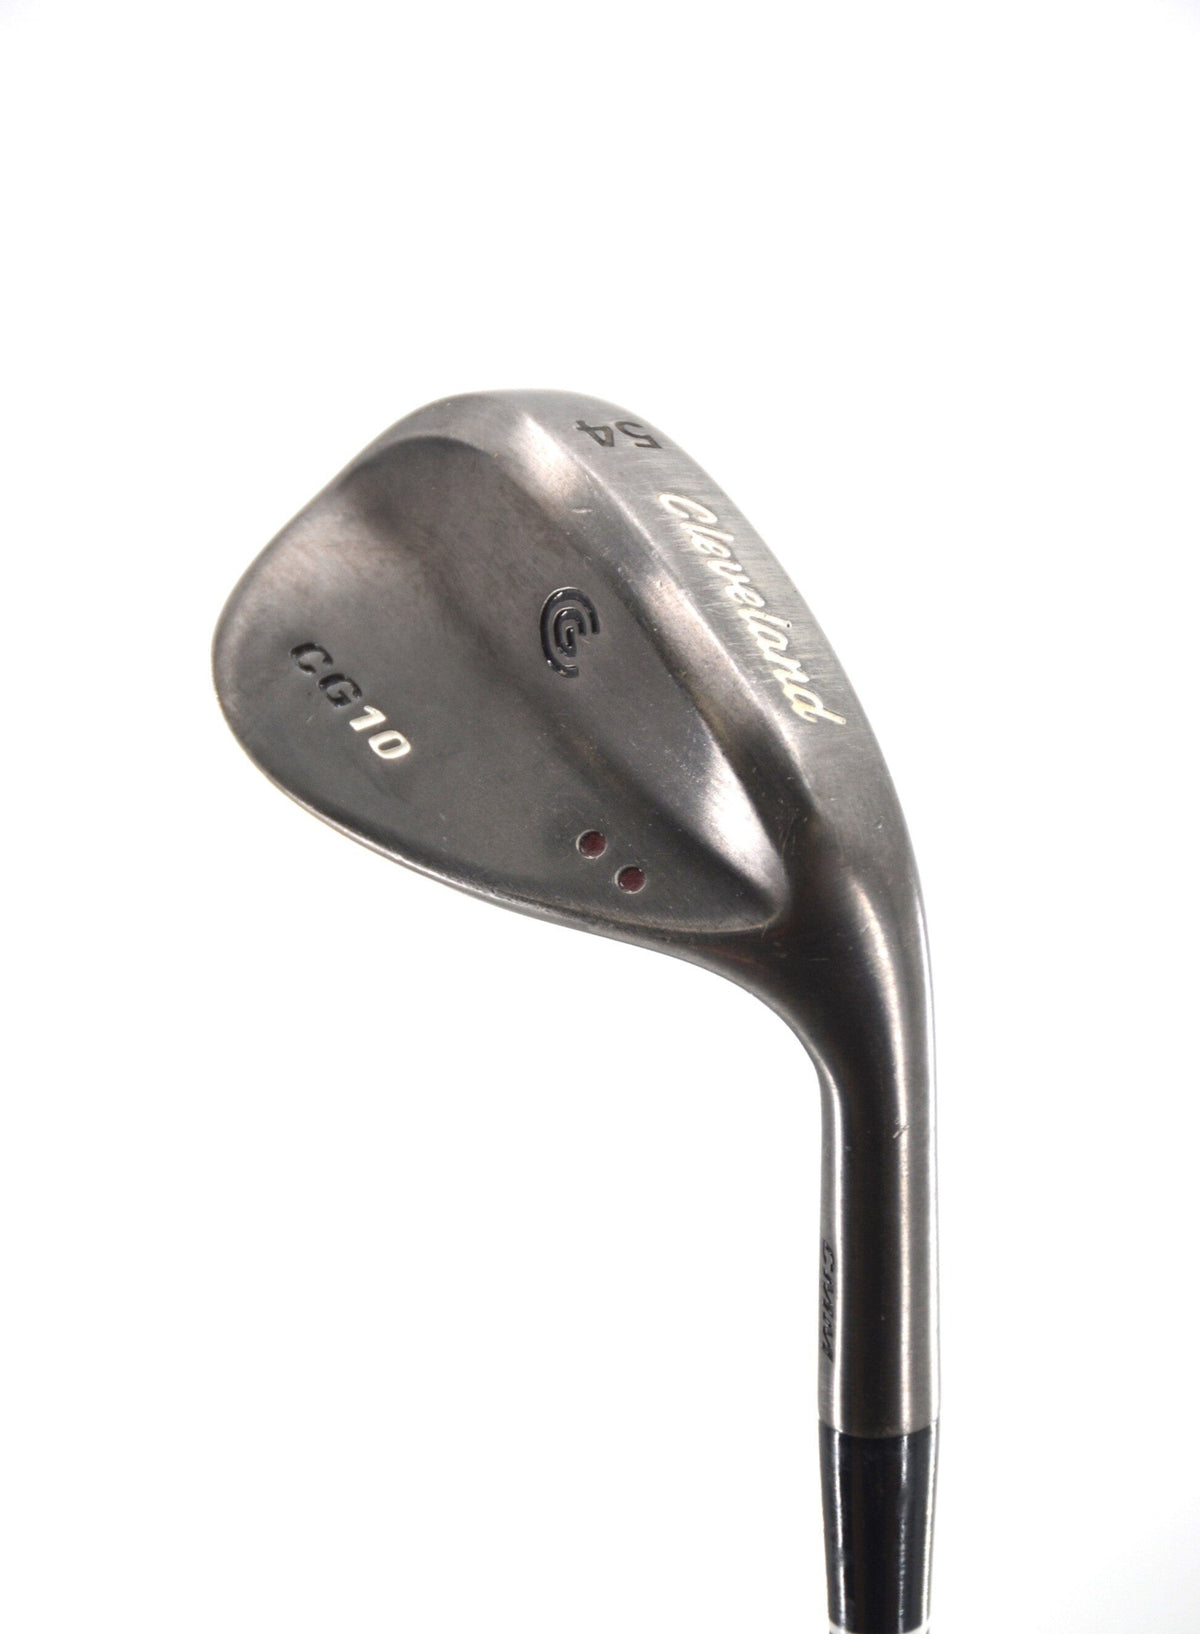 Cleveland CG10 Black Pearl 54 Degree Wedge Wedge Flex Golf Clubs GolfRoots 